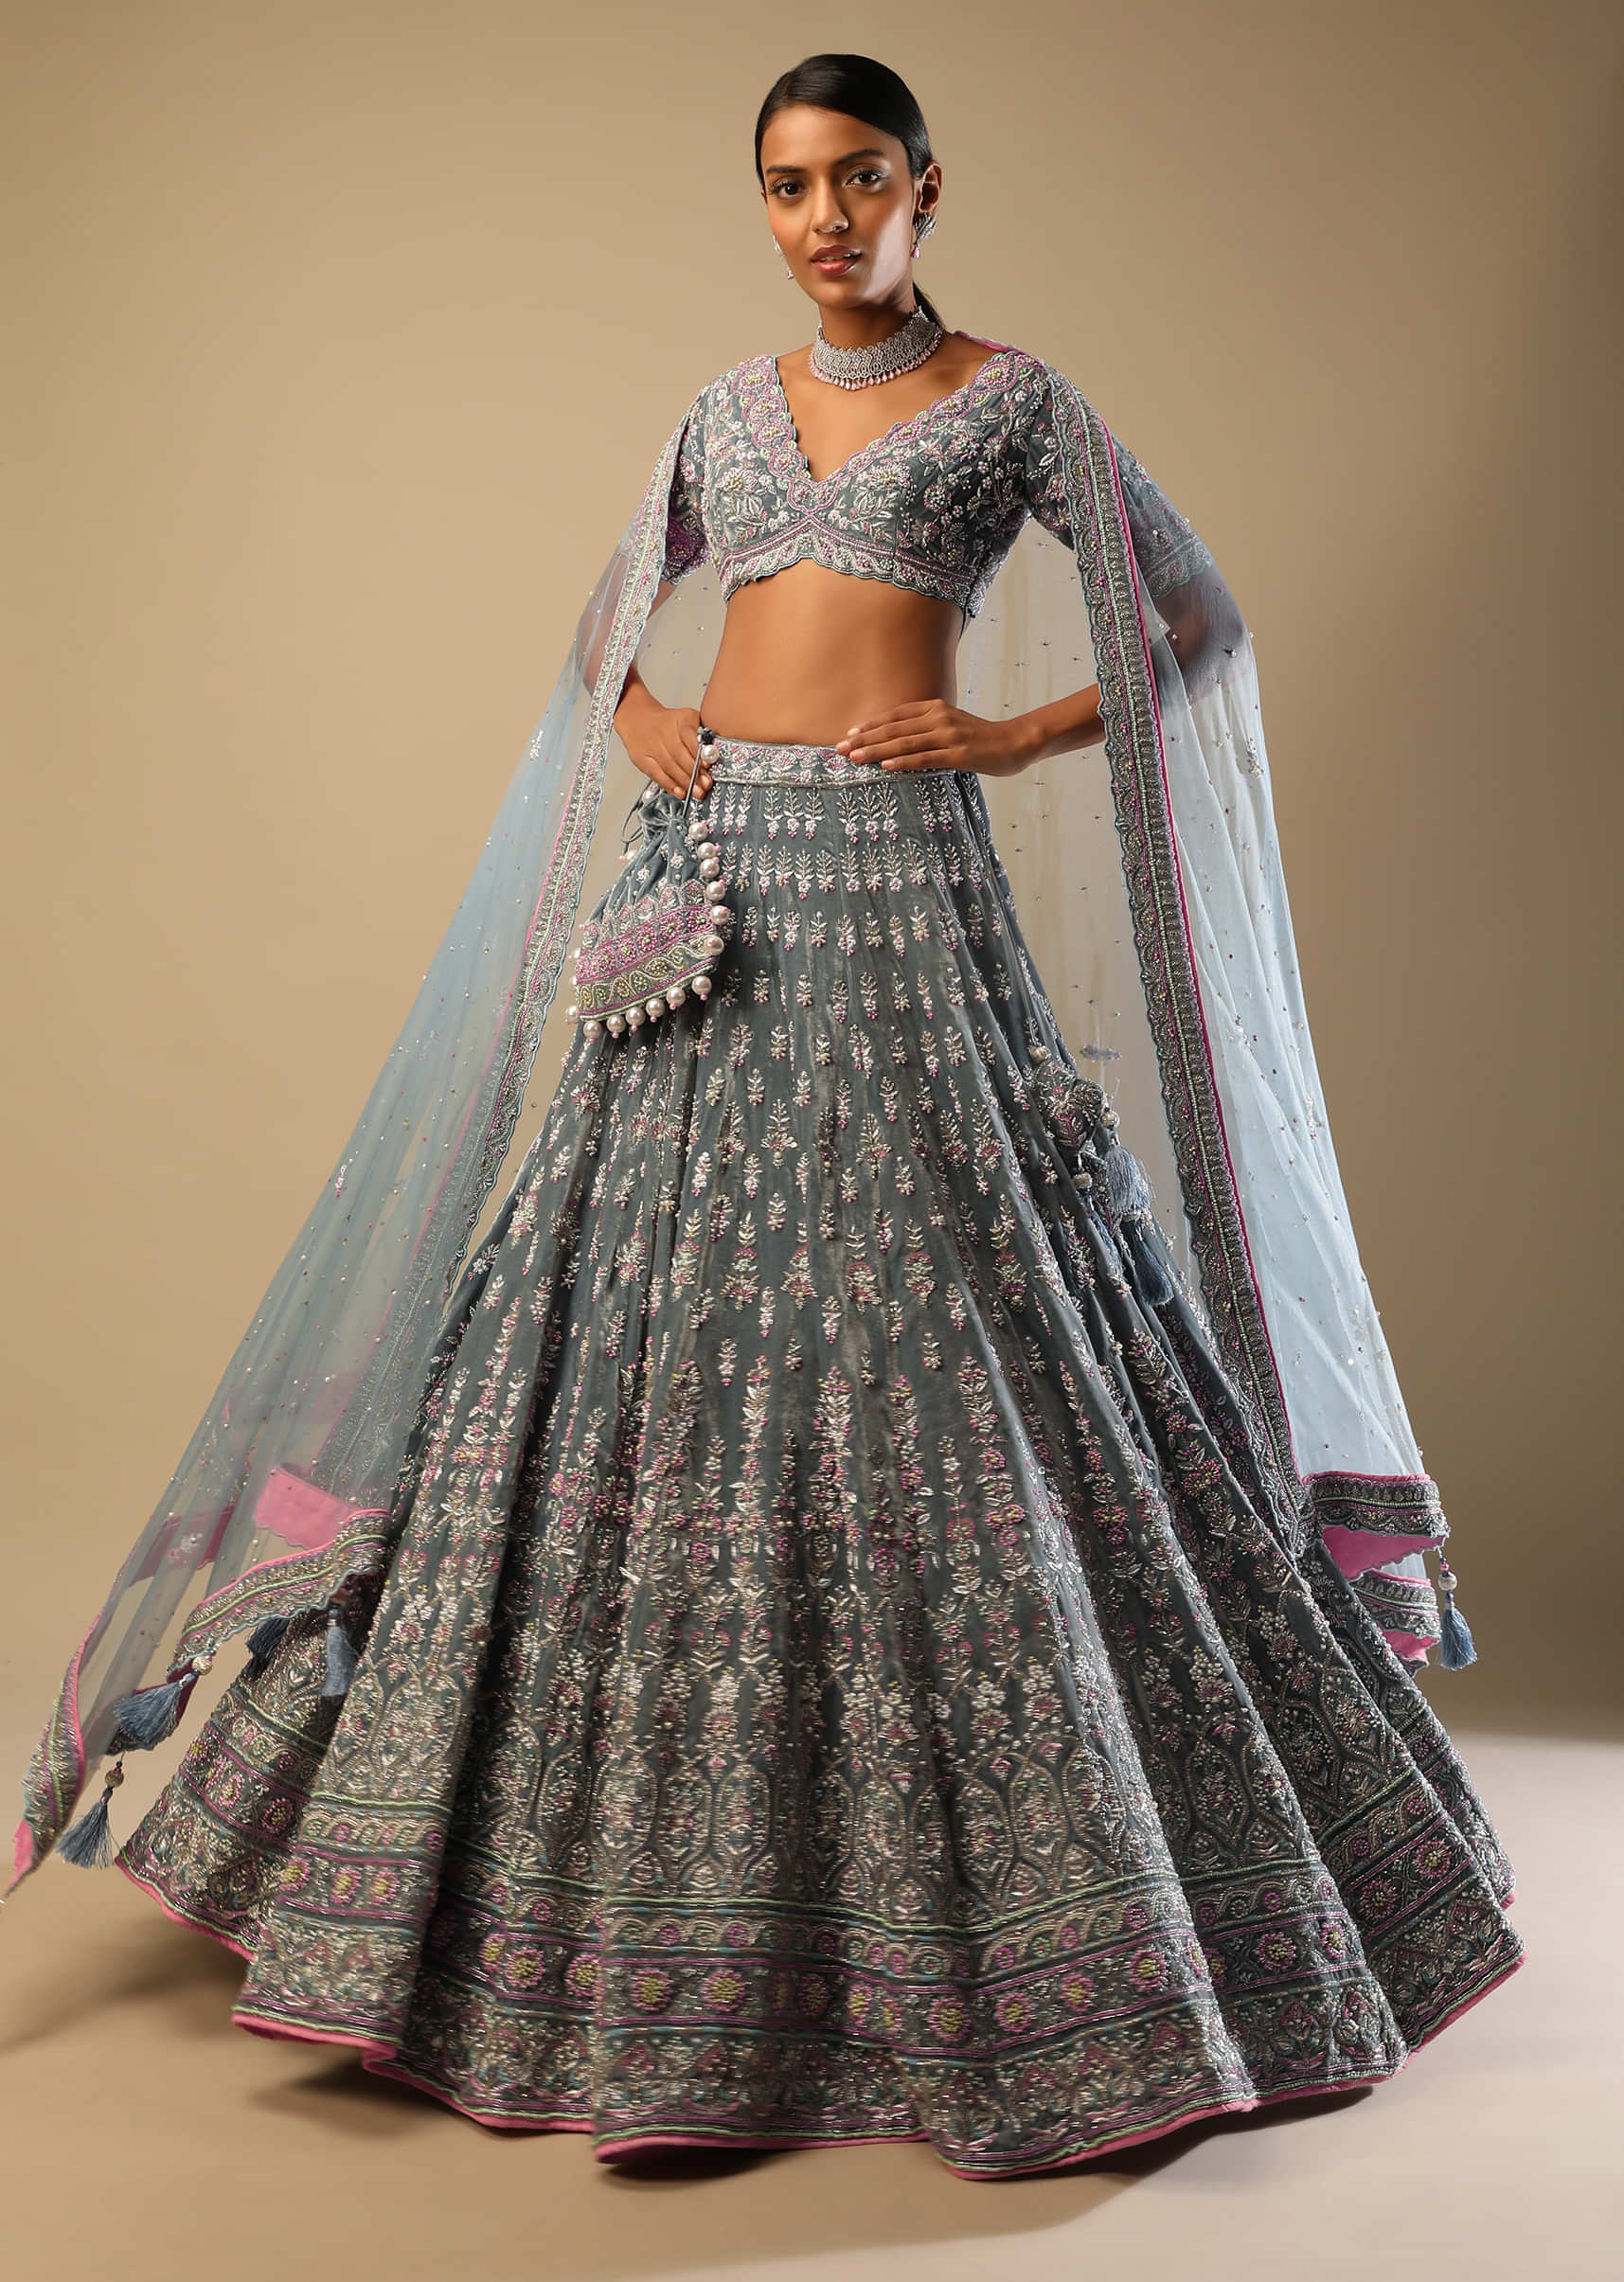 Frost Blue Lehenga Choli With Multi Colored Beads Embroidered Buttis And Mughal Border 